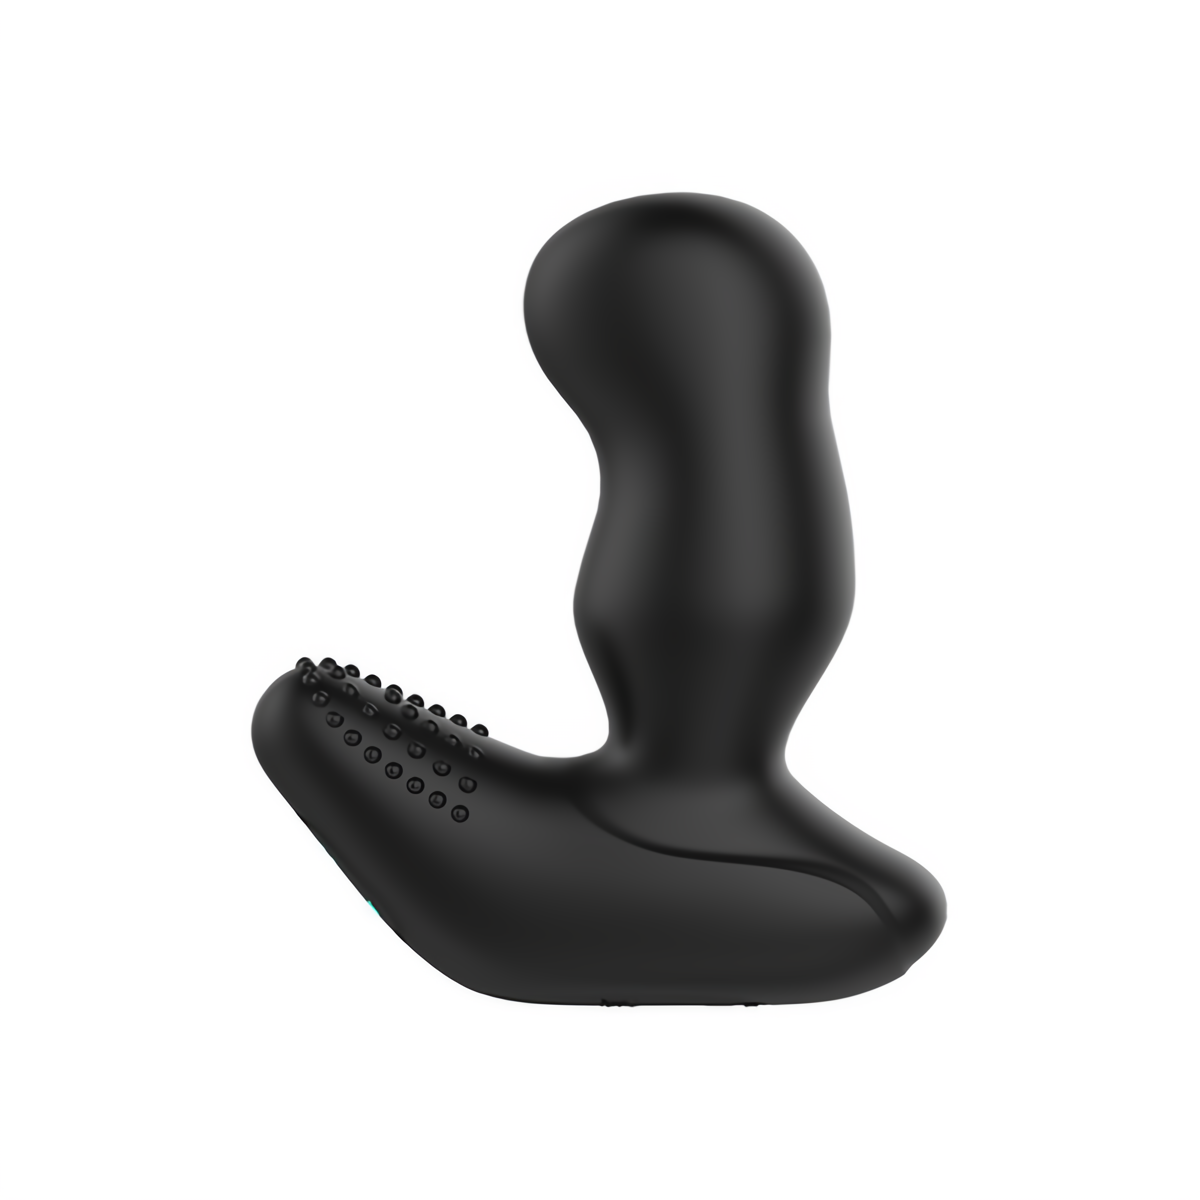 Revo Extreme - Waterproof Rotating Prostate Massager with Remote Control